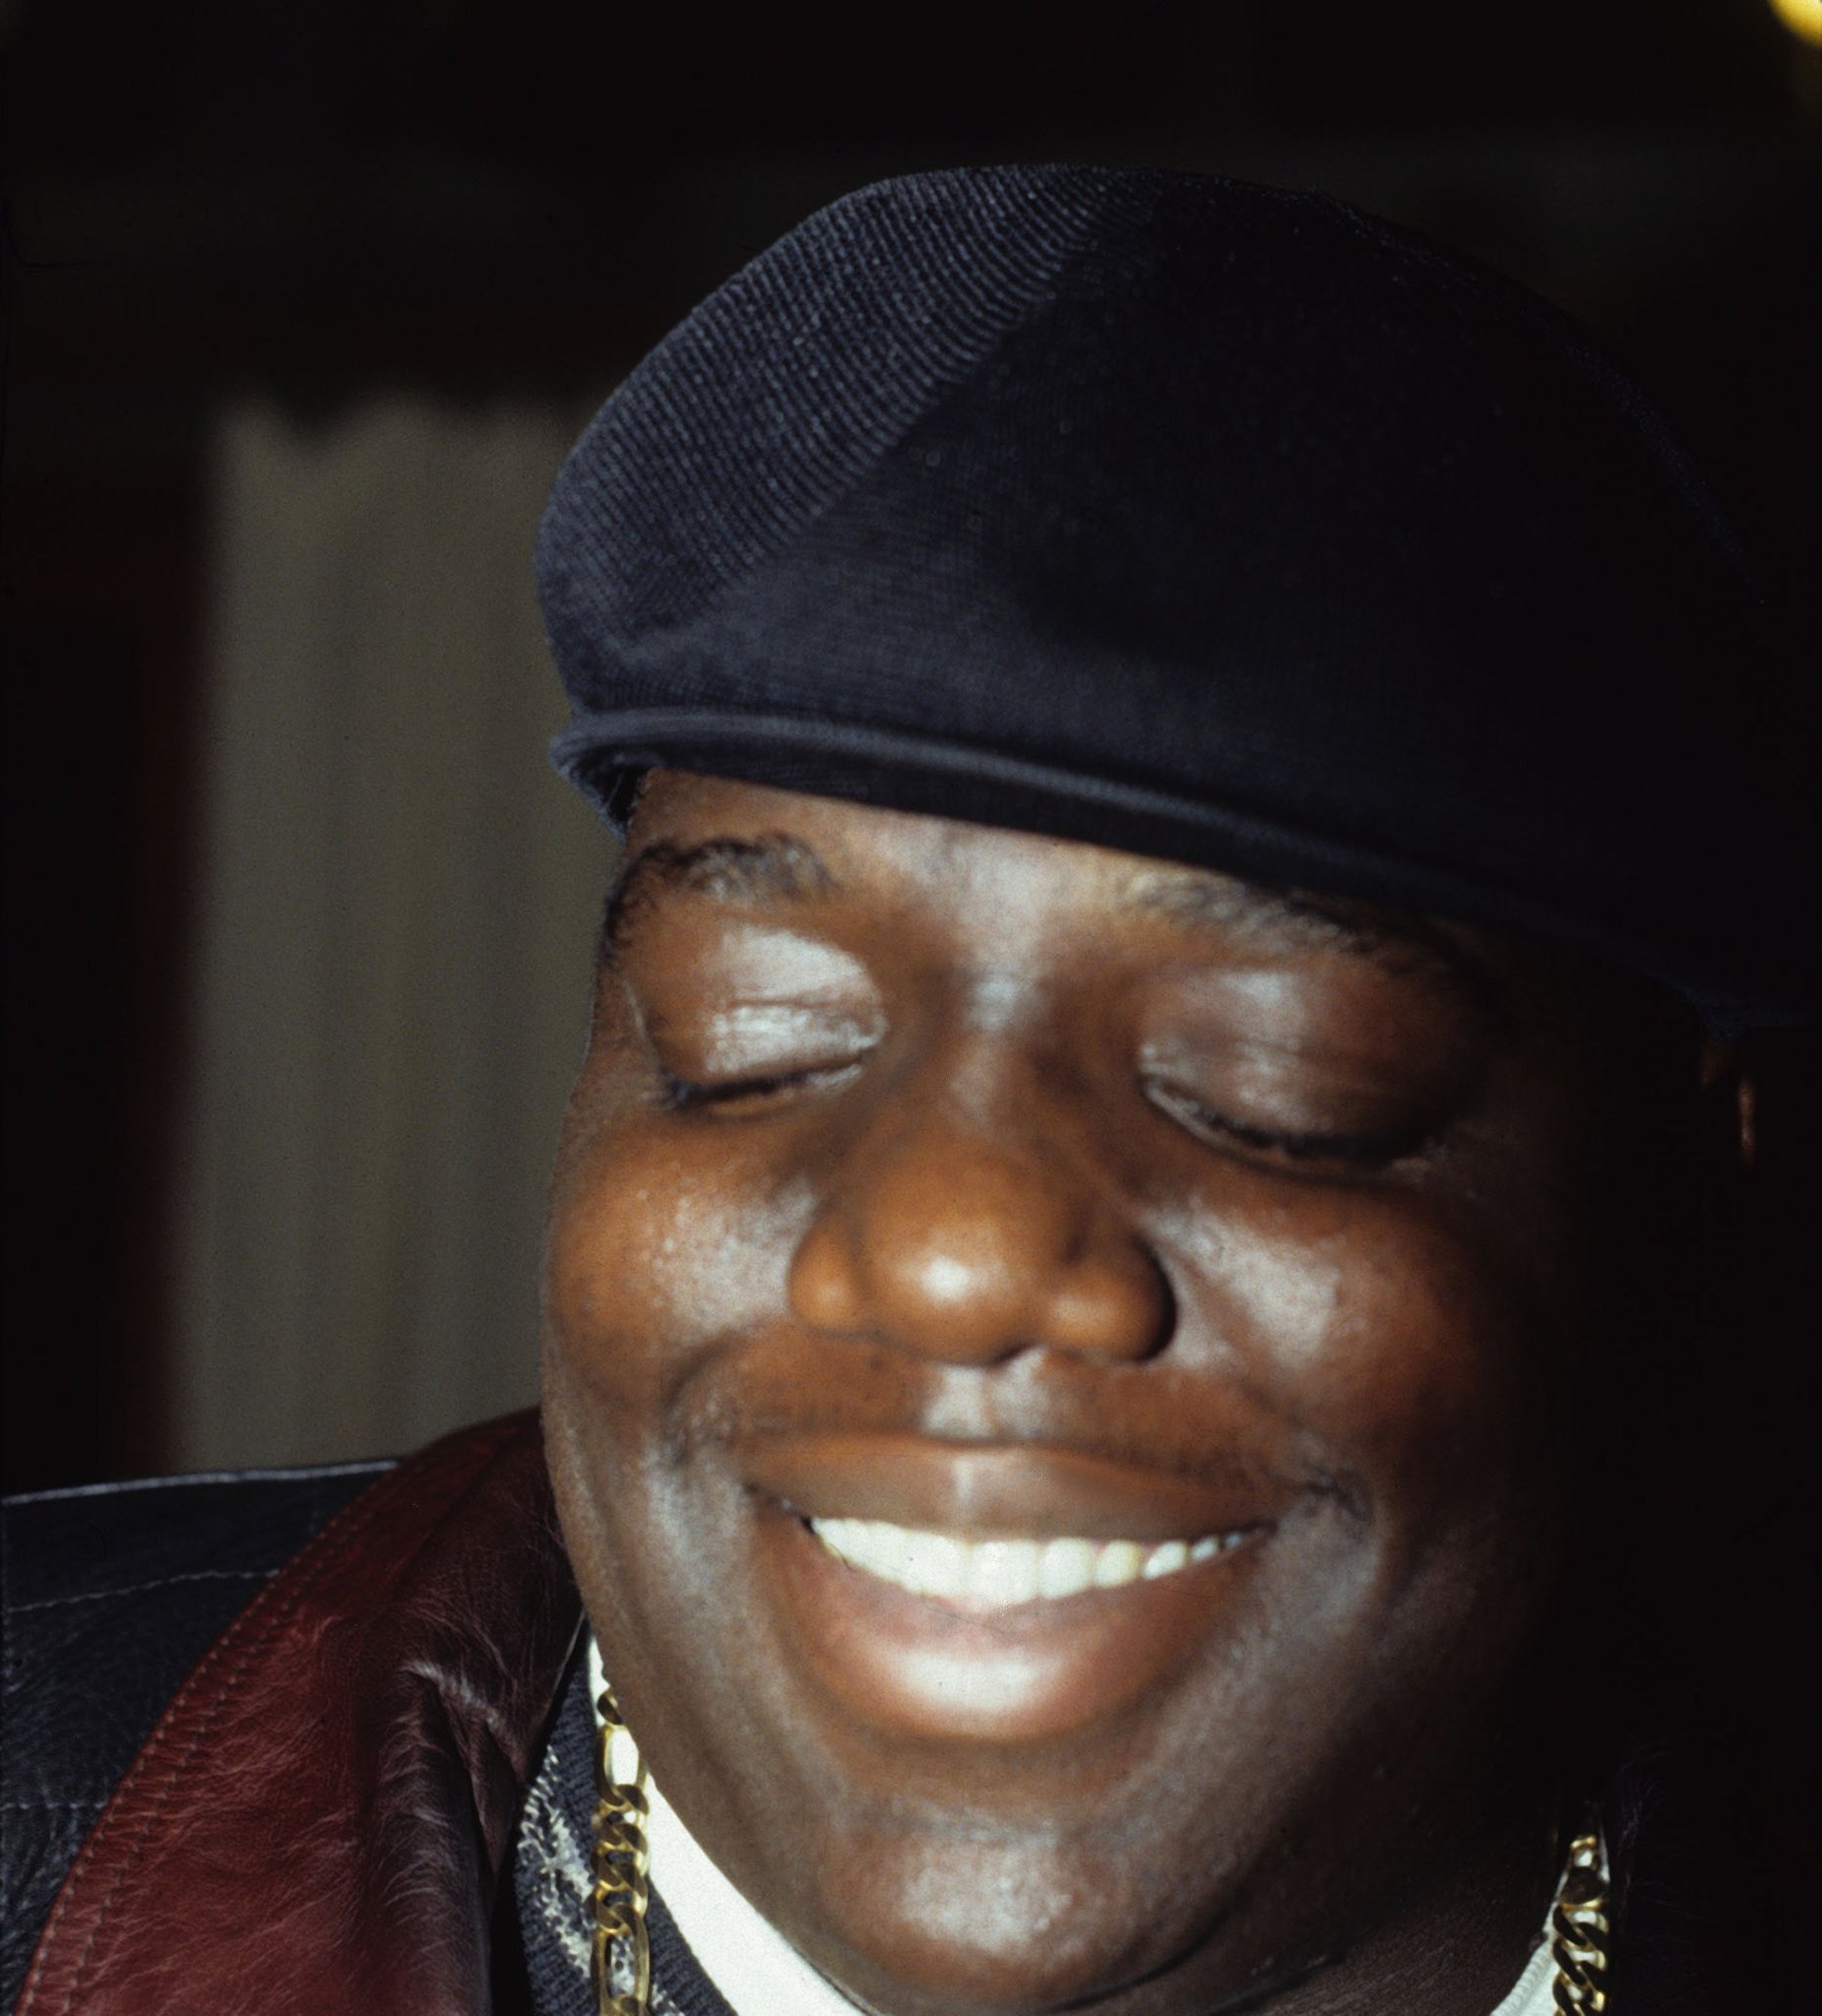 #17 The Notorious B.I.G.